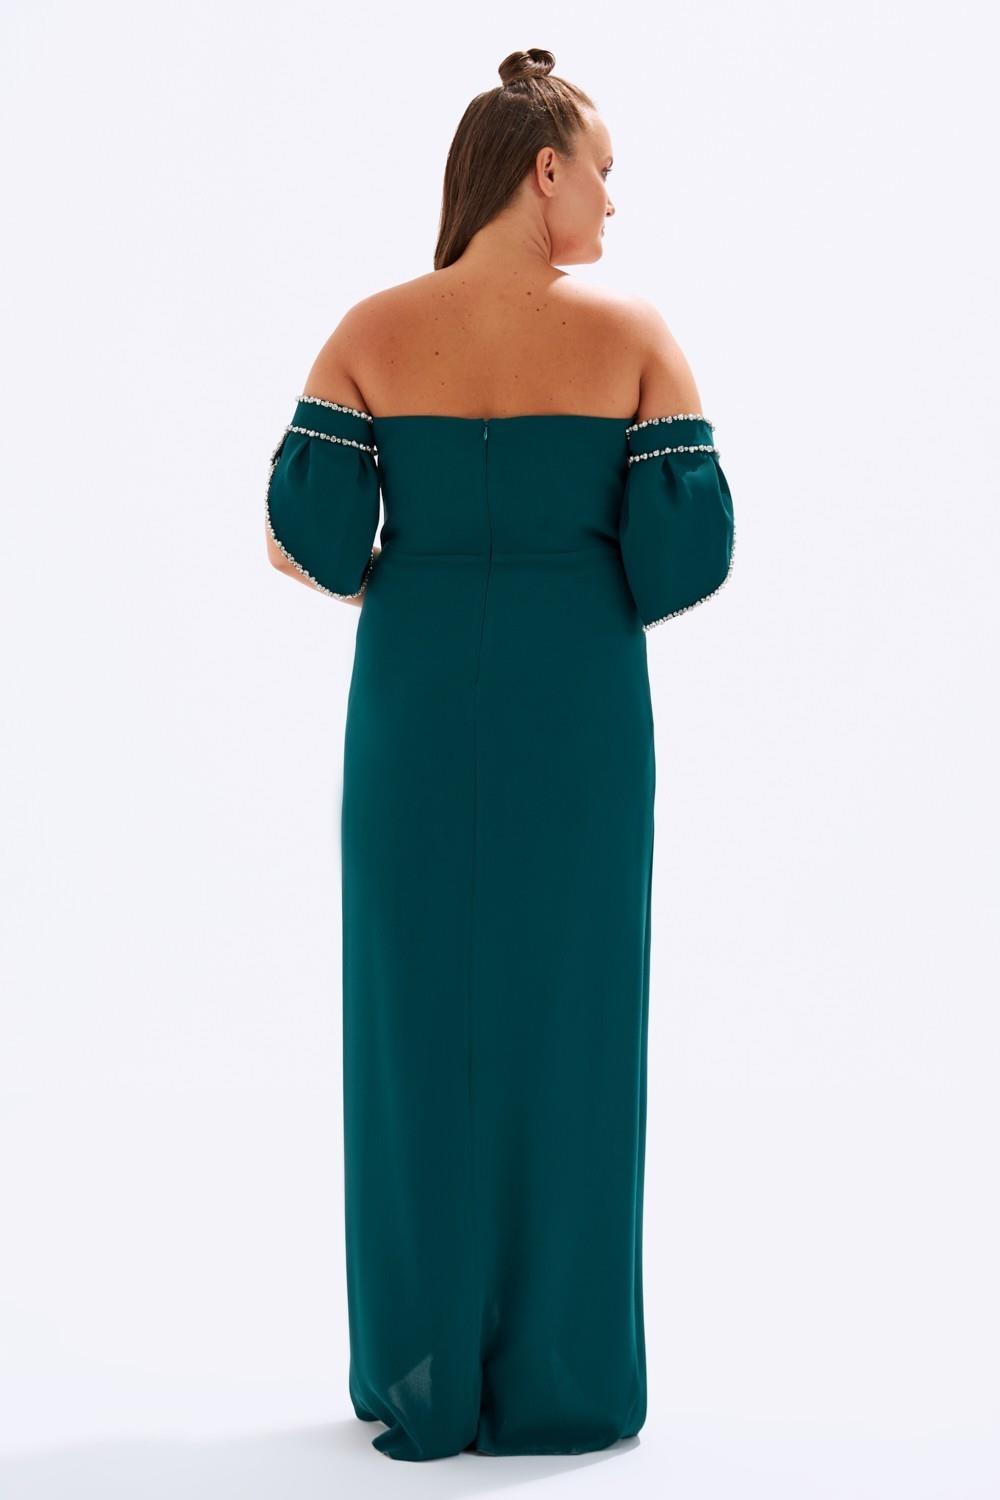 Embroidered Sleeve Detailed Plus Size Evening Dress